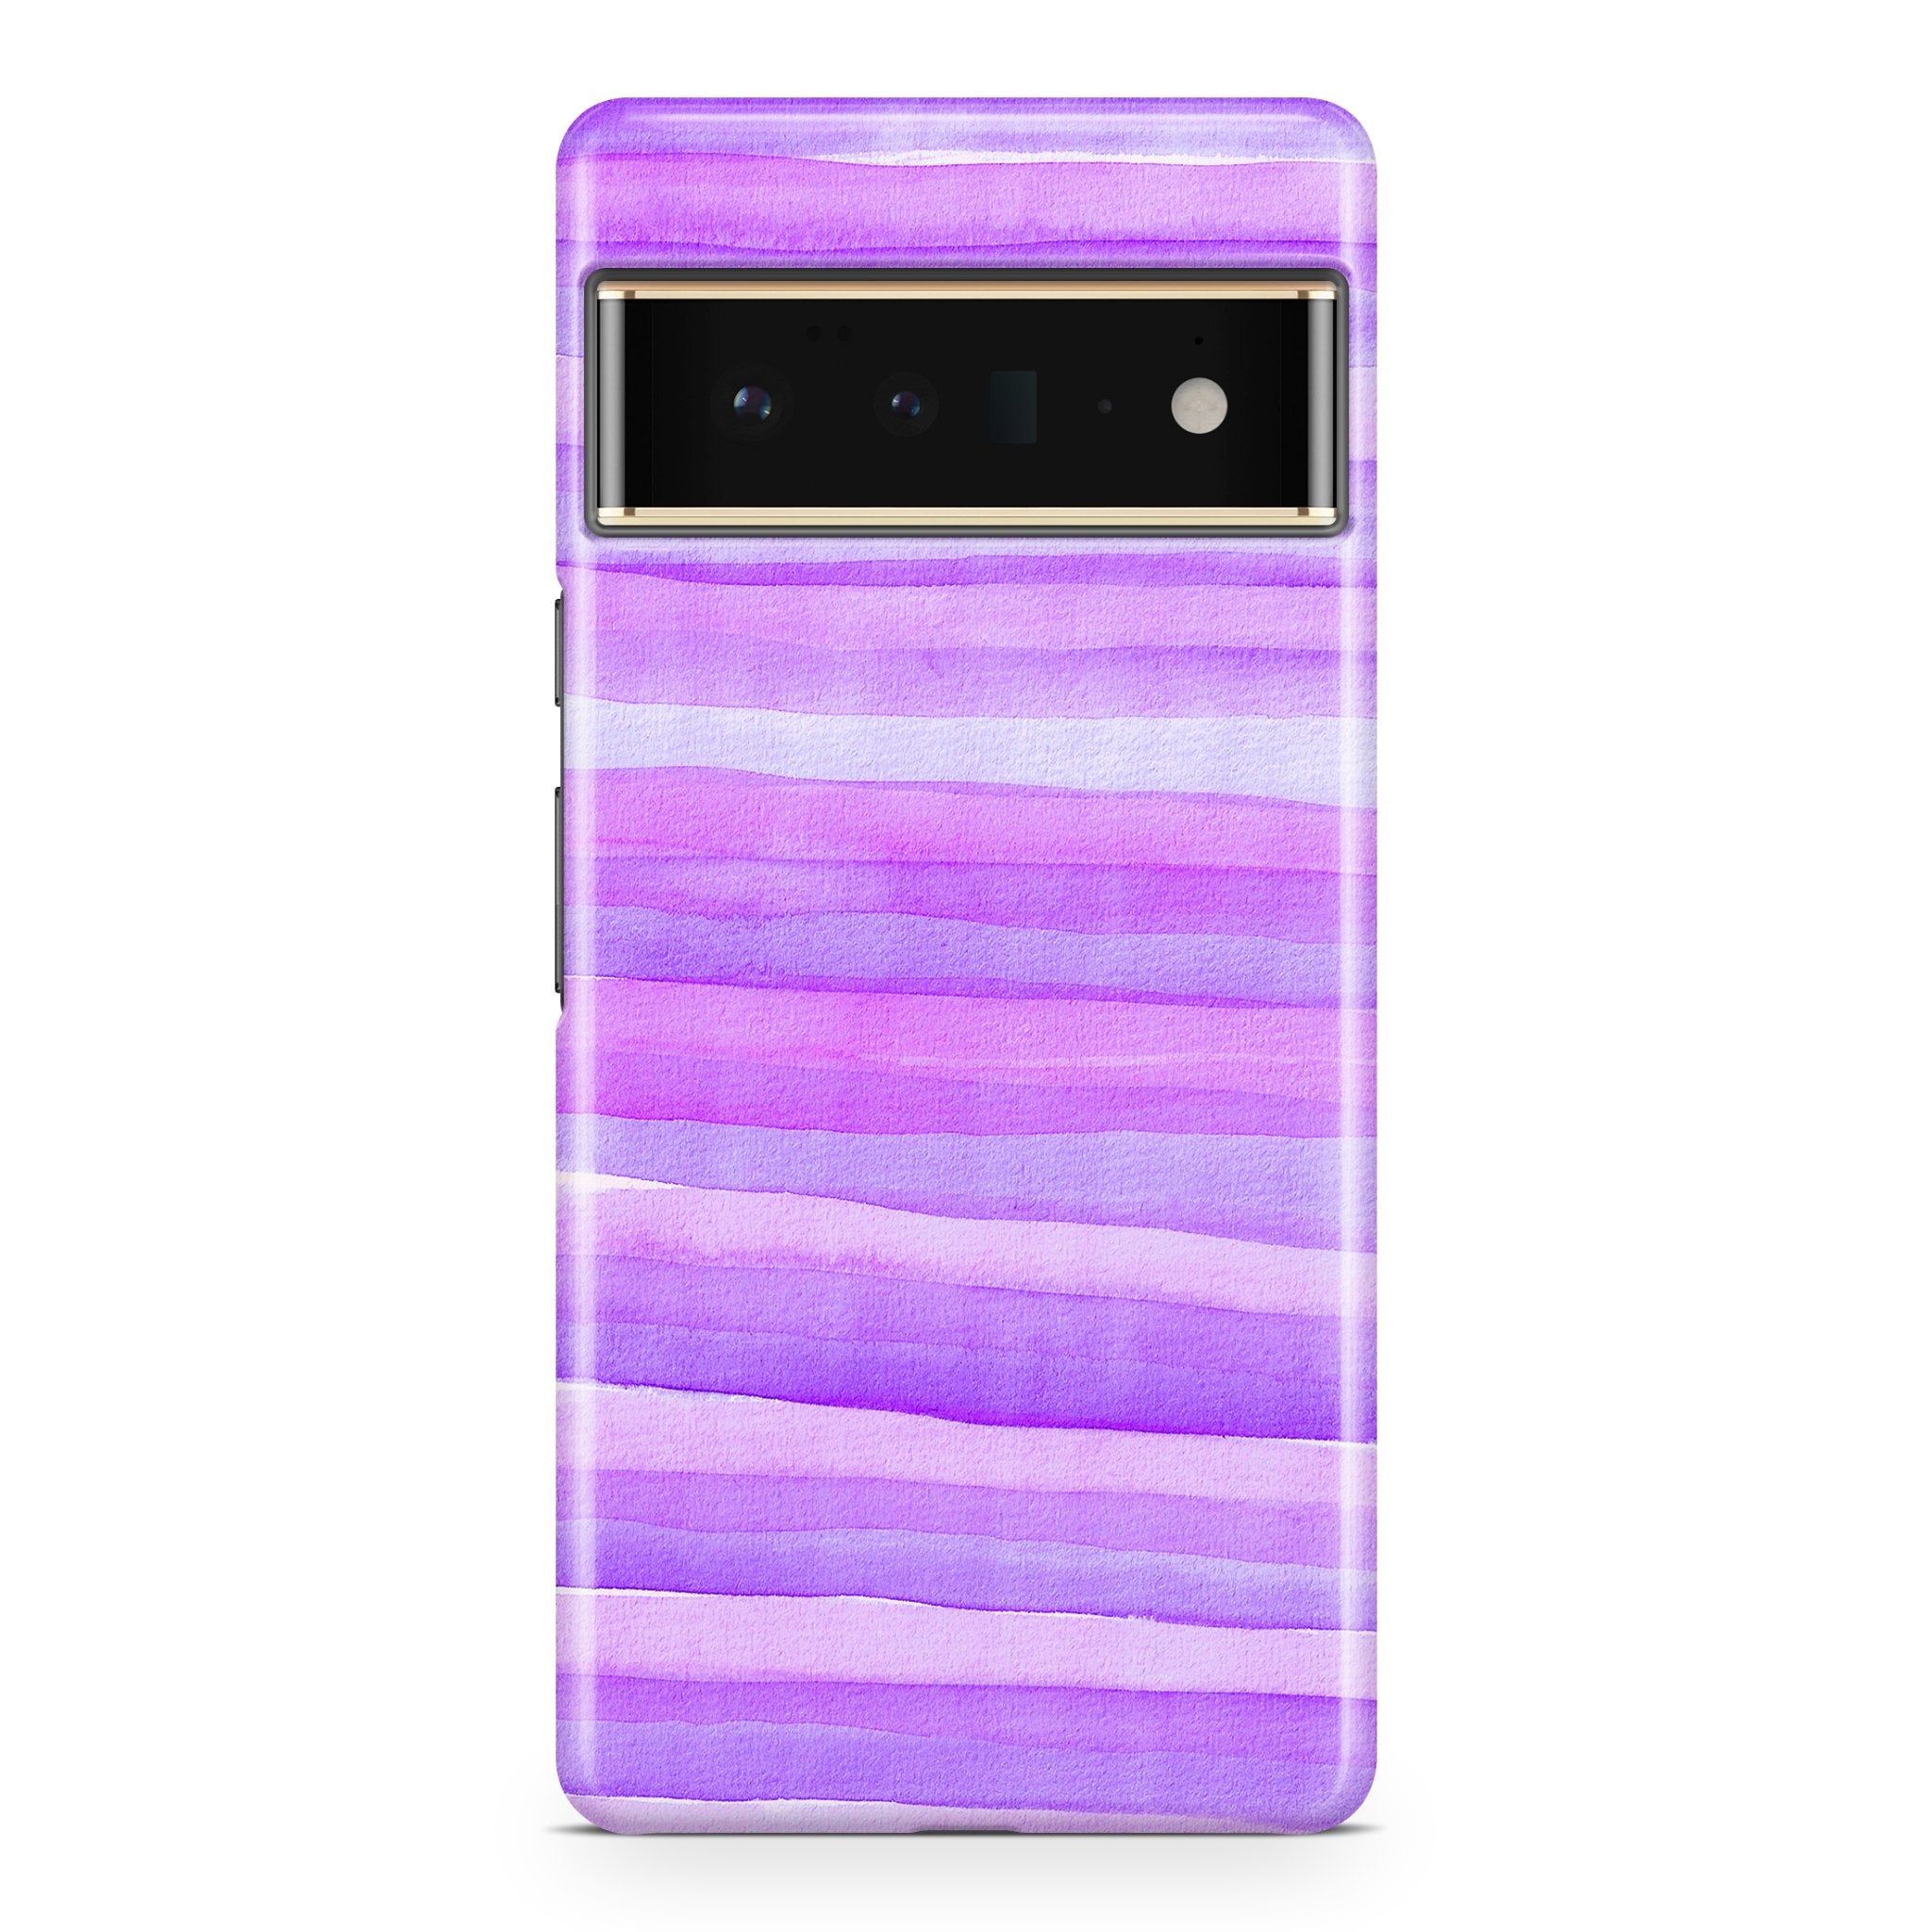 Purple Passion - Google phone case designs by CaseSwagger